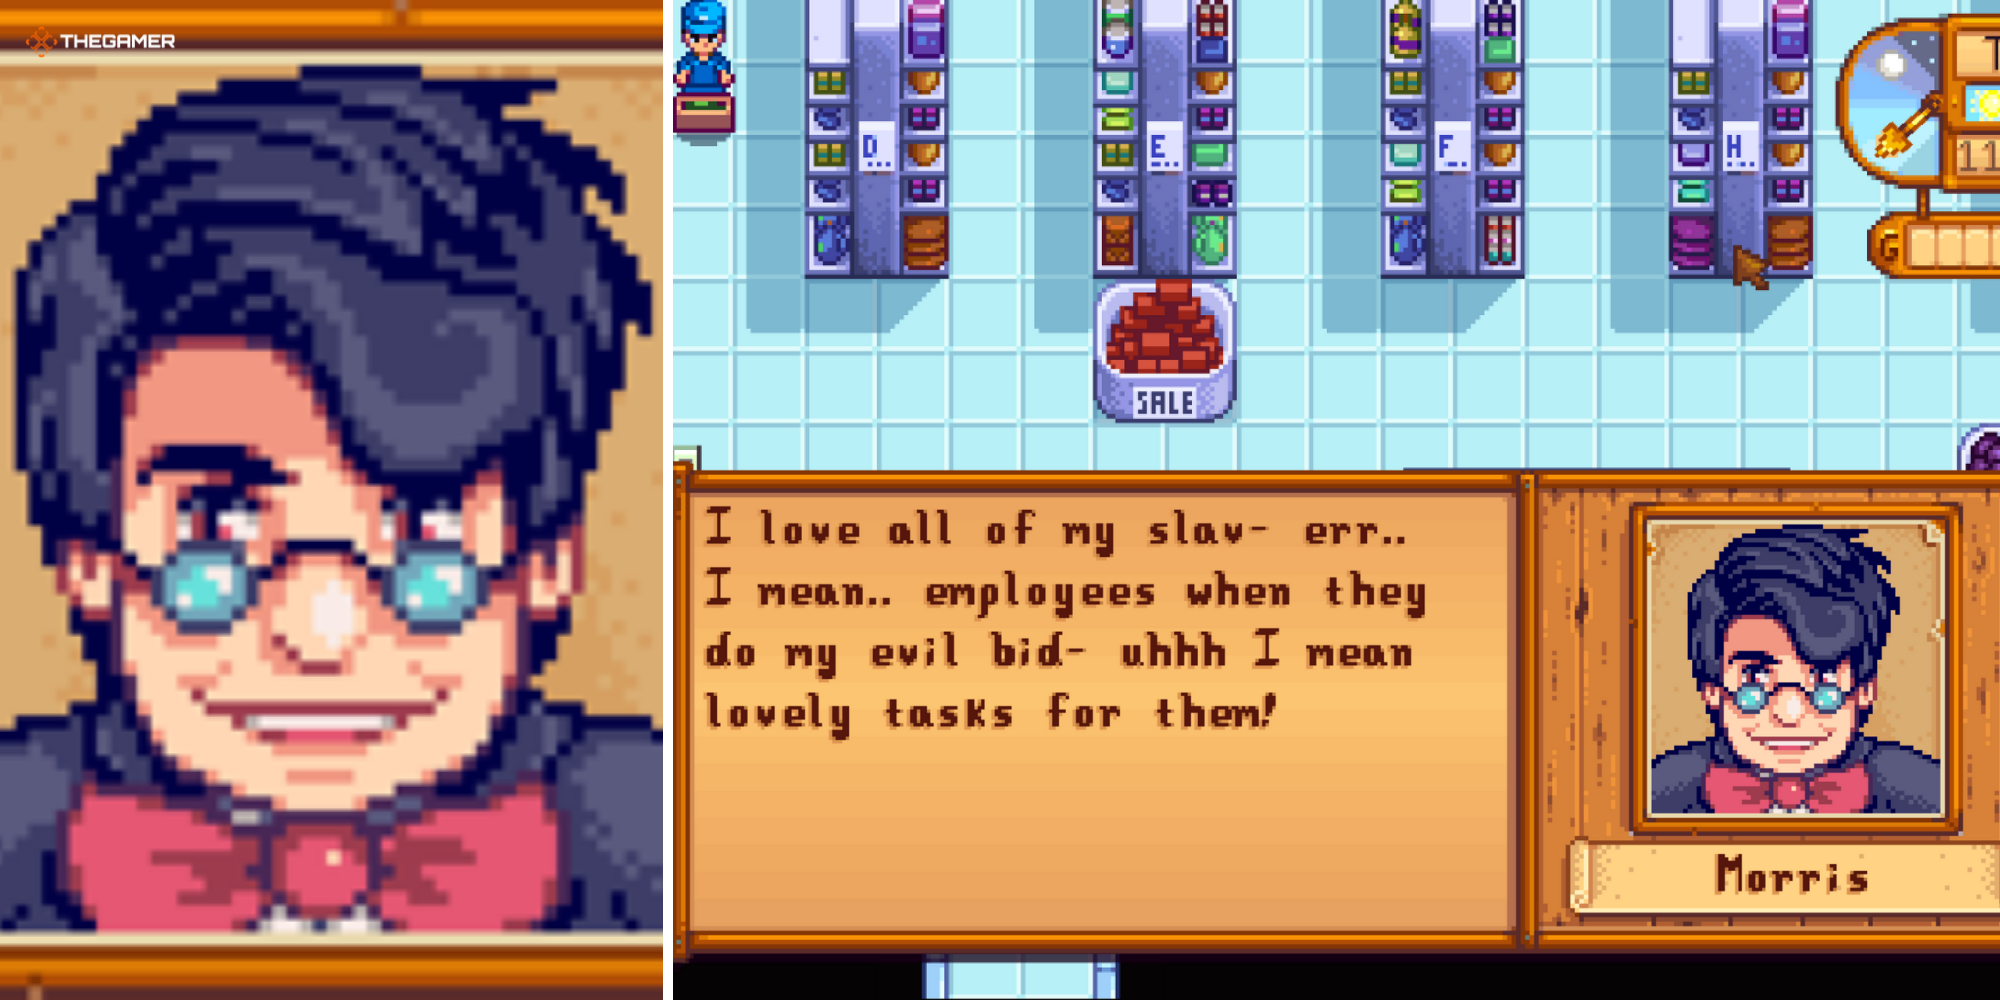 Stardew-Valley---split-image-of-Morris-(profile-picture-on-left,-conversation-on-right).png